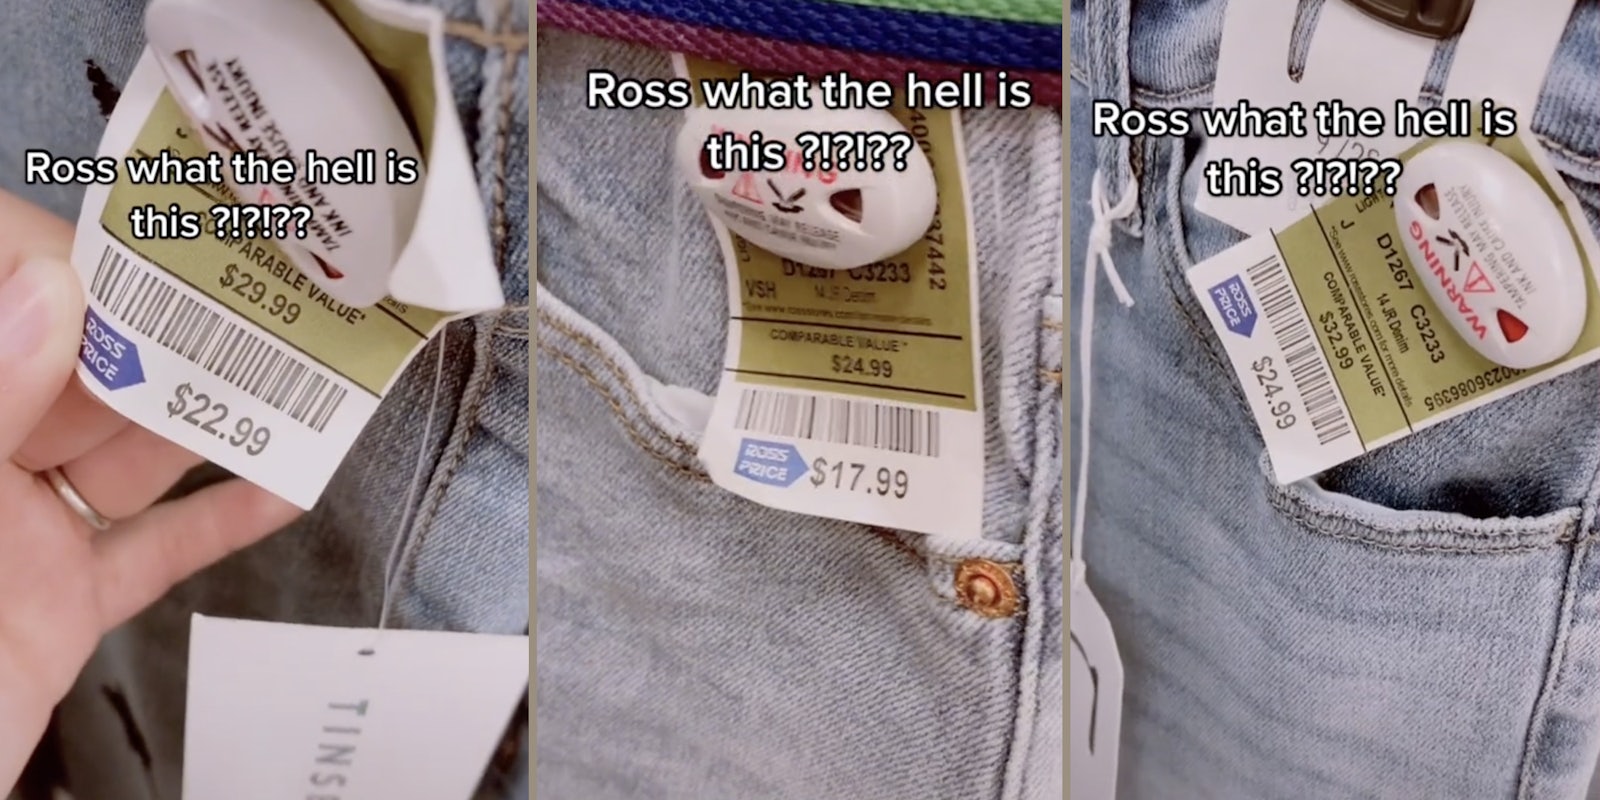 price tags on jeans at ross store